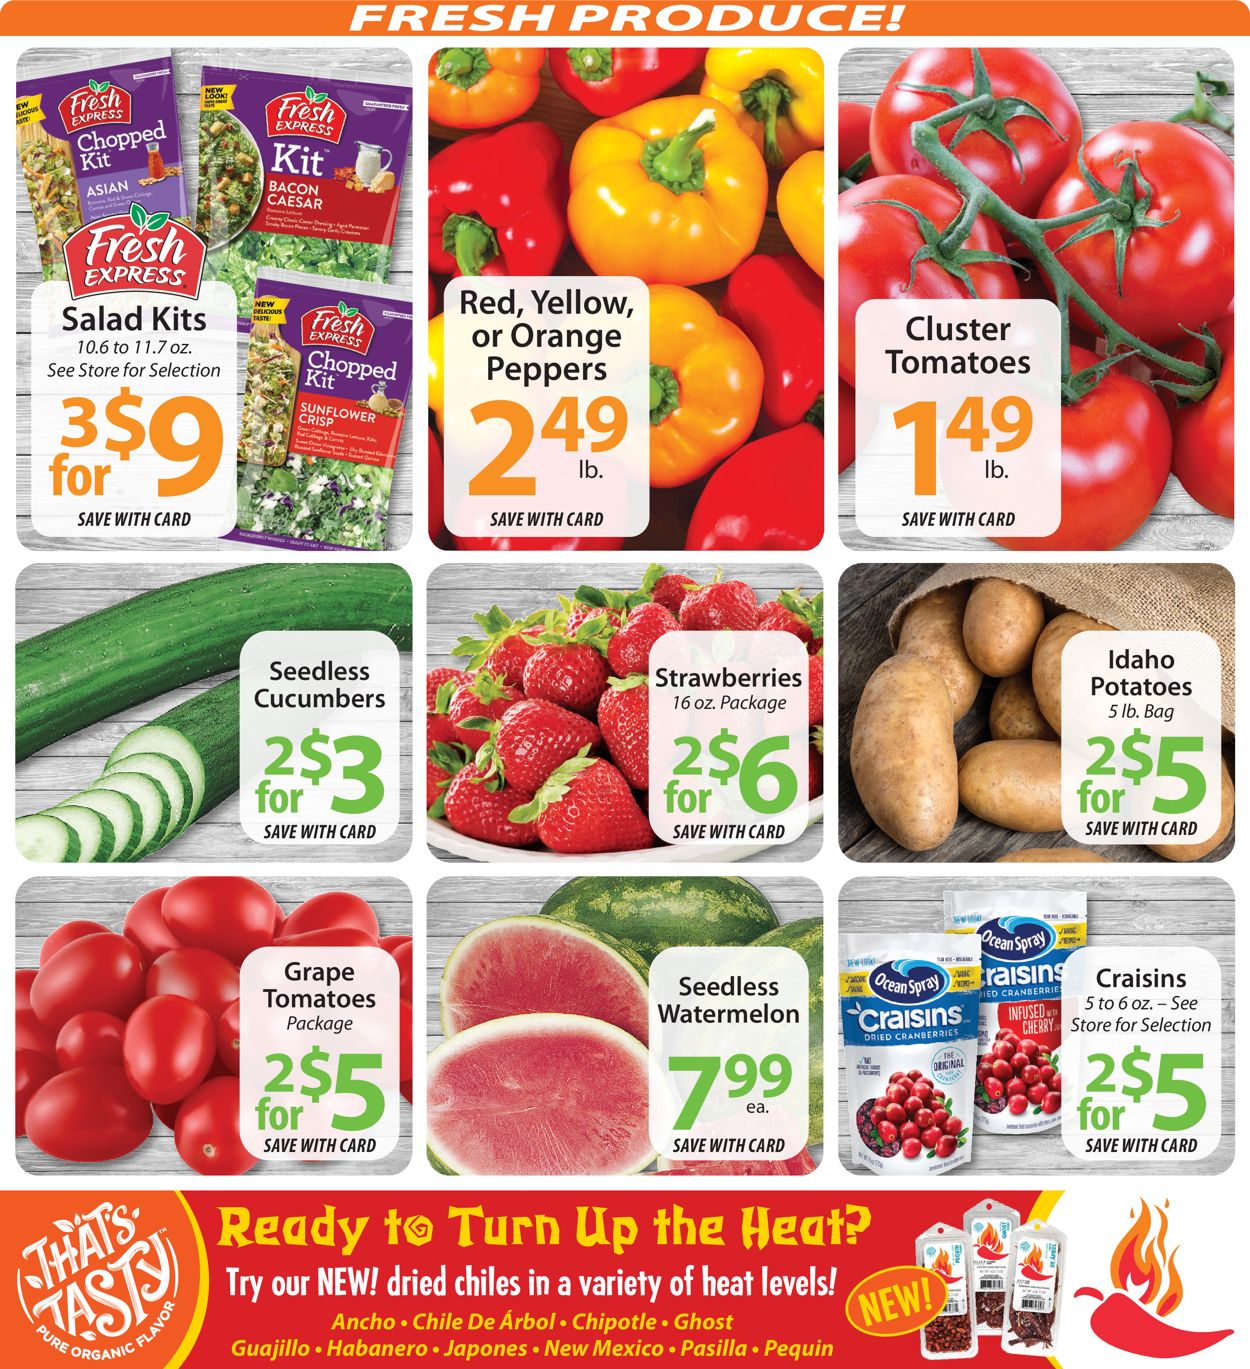 Acme Fresh Market Ad from 04/29/2021